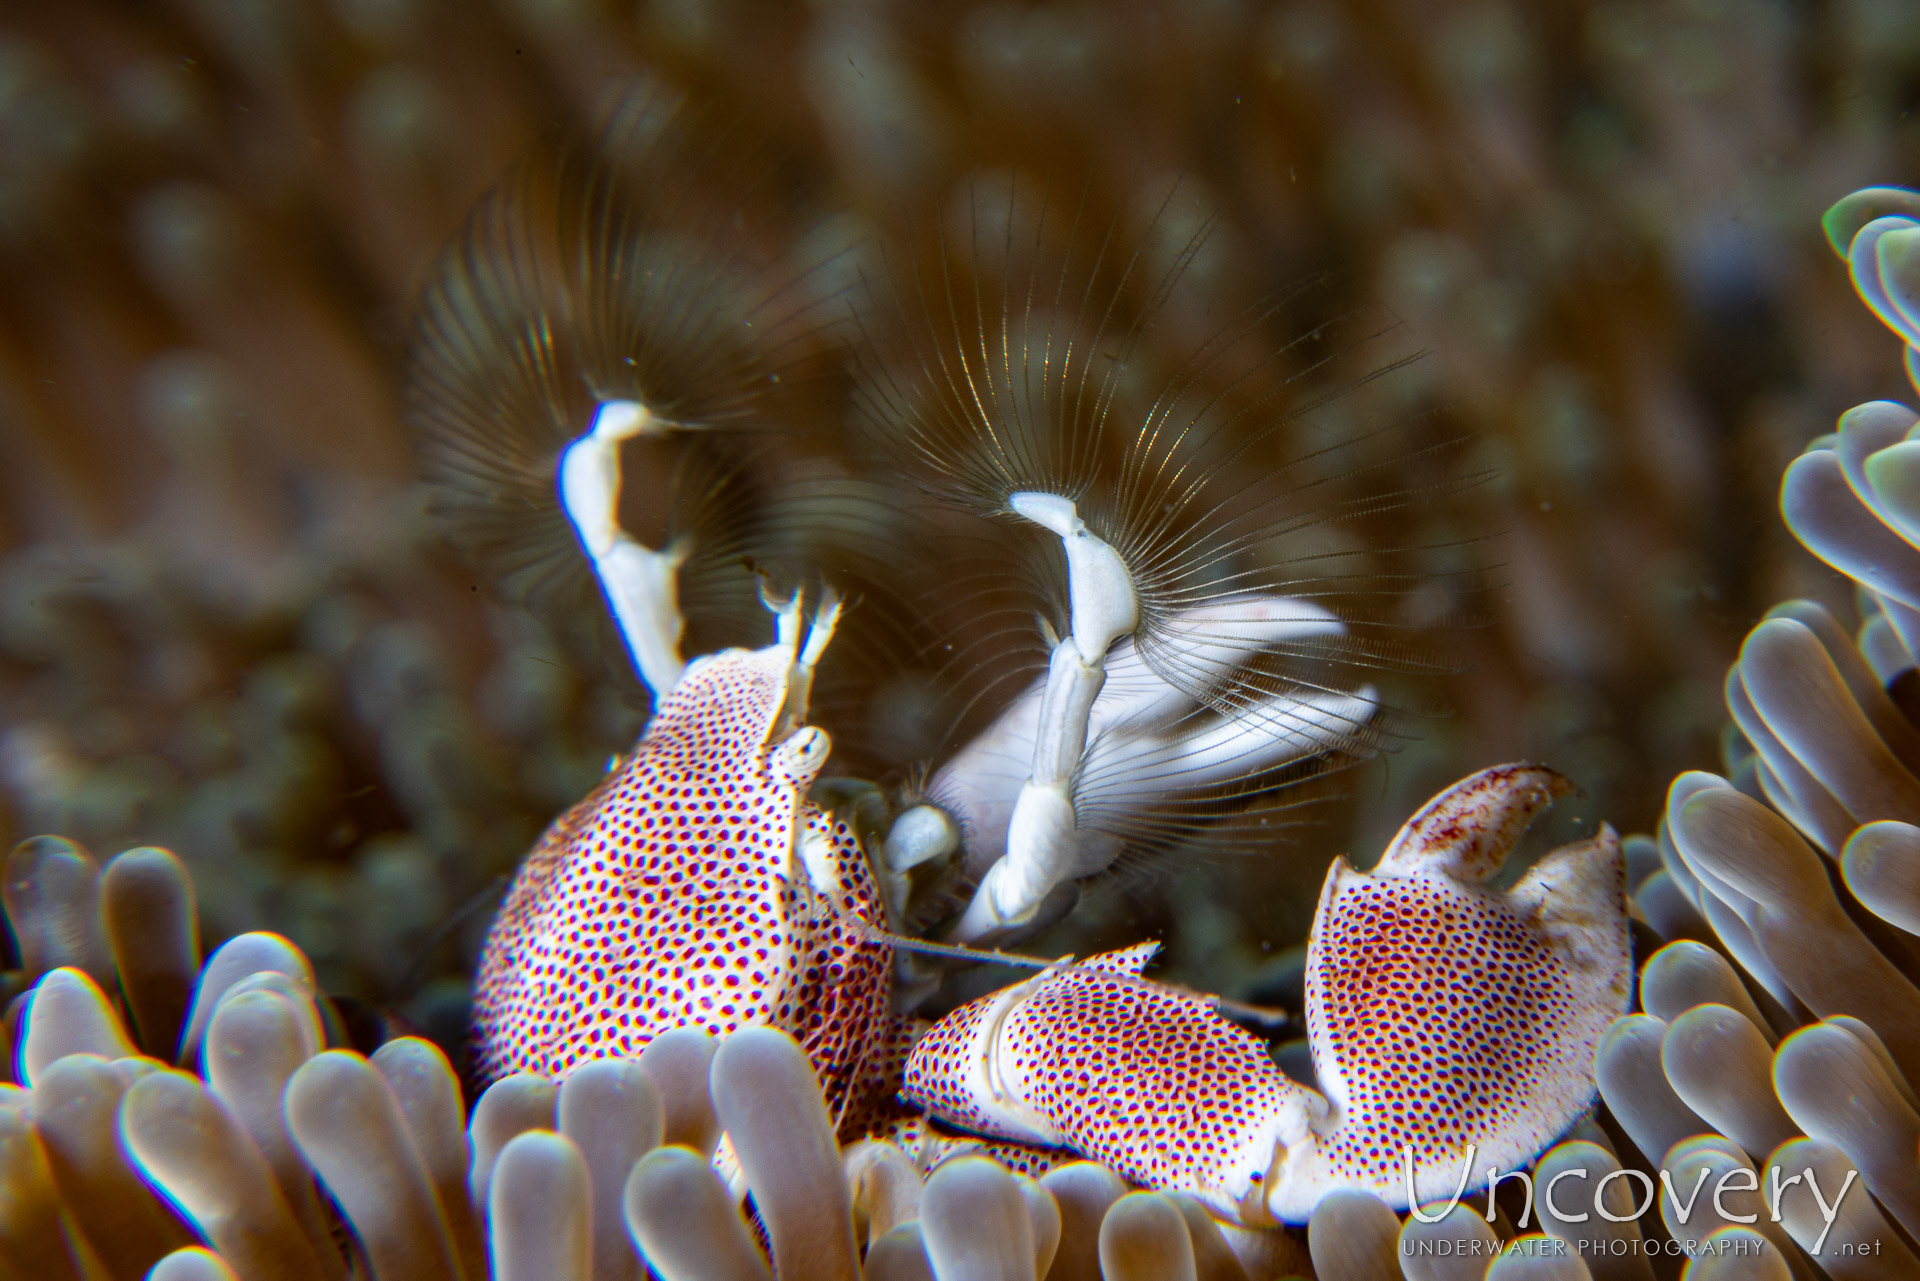 Spotted Porcelain Crab (neopetrolisthes Maculatus), photo taken in Philippines, Negros Oriental, Dauin, Pier South